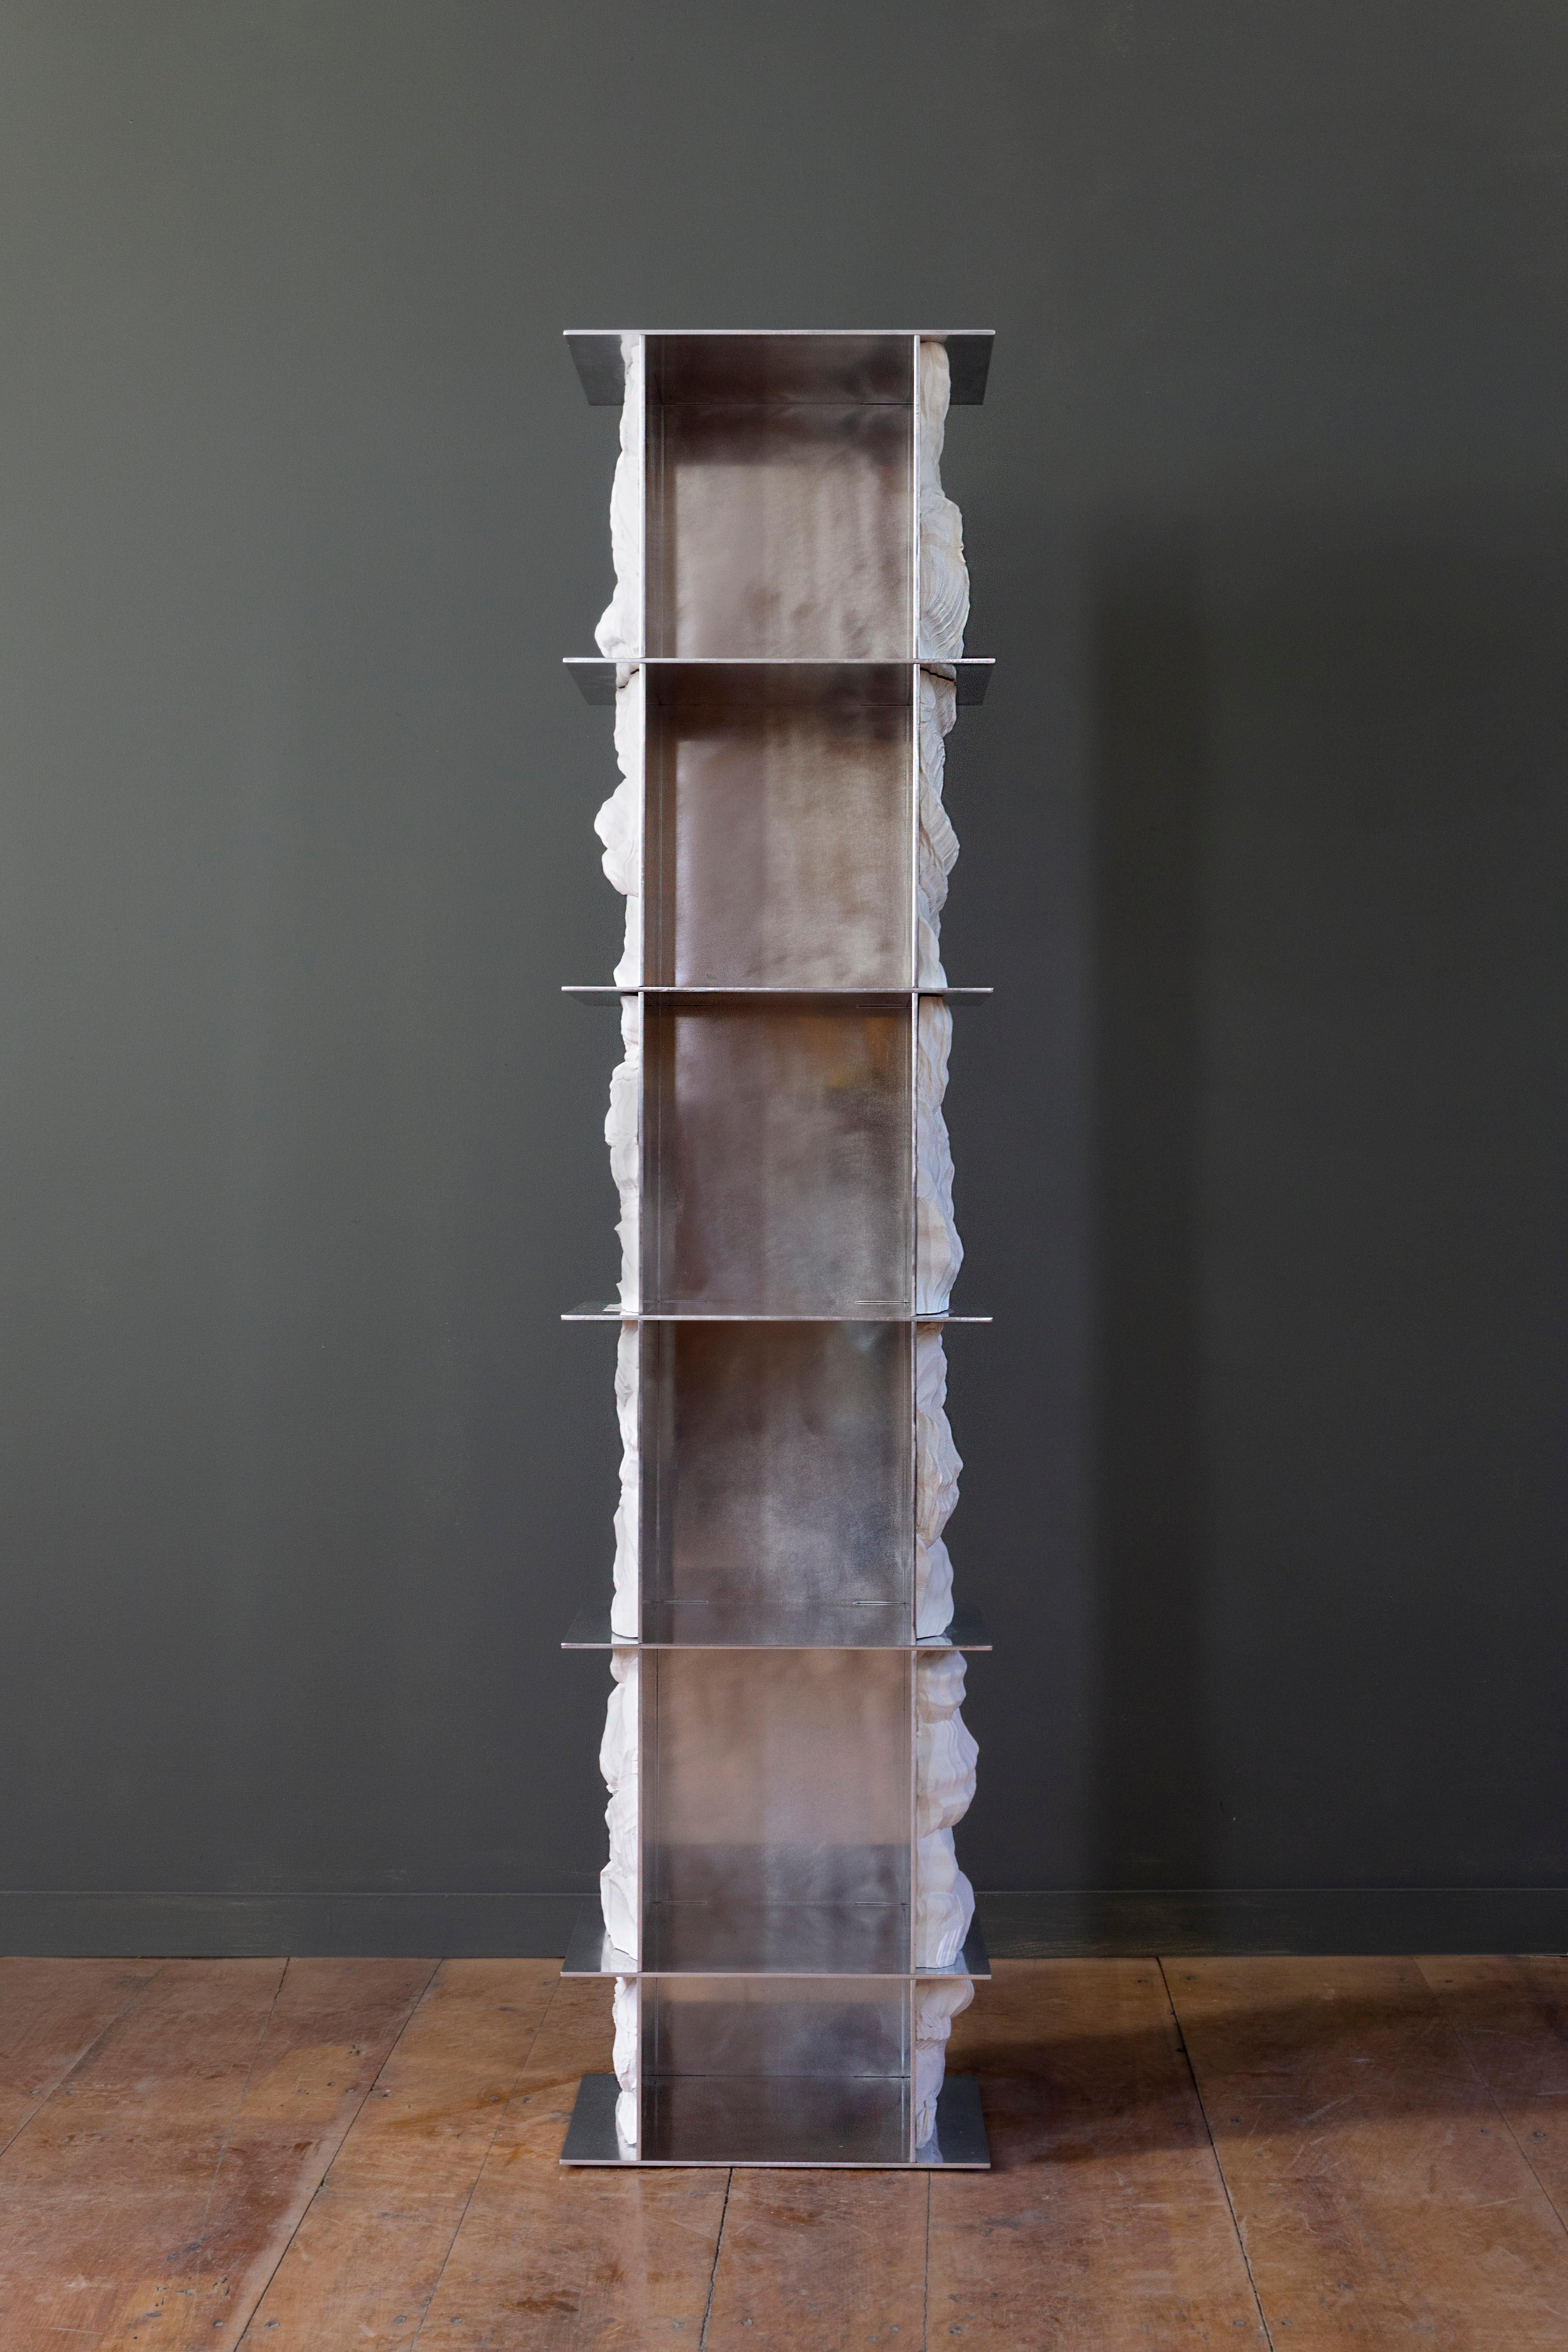 A slender tower-like sculptural bookcase, made from a rigid hand polished aluminum structure. Through the grid-like structure, a cast form of the collection's signature texture flows continuously through the layers. The polishing of the aluminum